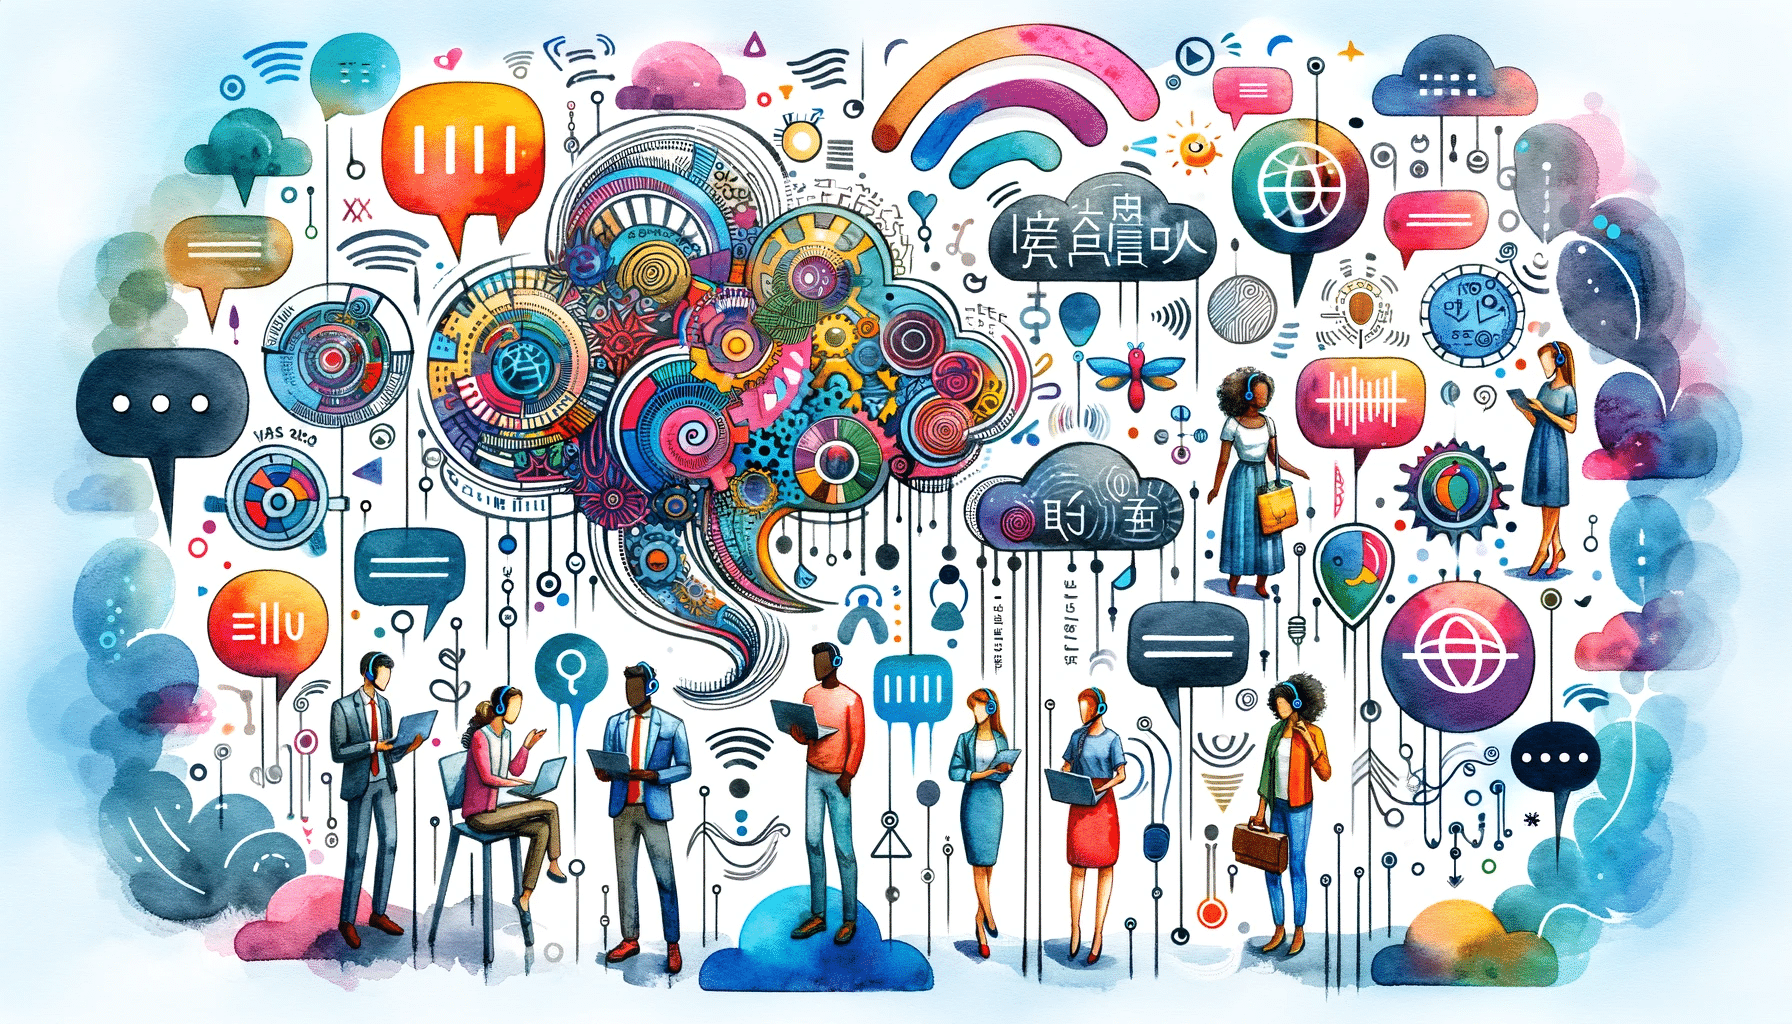 This vibrant watercolor illustration depicts multiple people engaged with digital devices amid a bustling array of colorful communication and technology symbols.